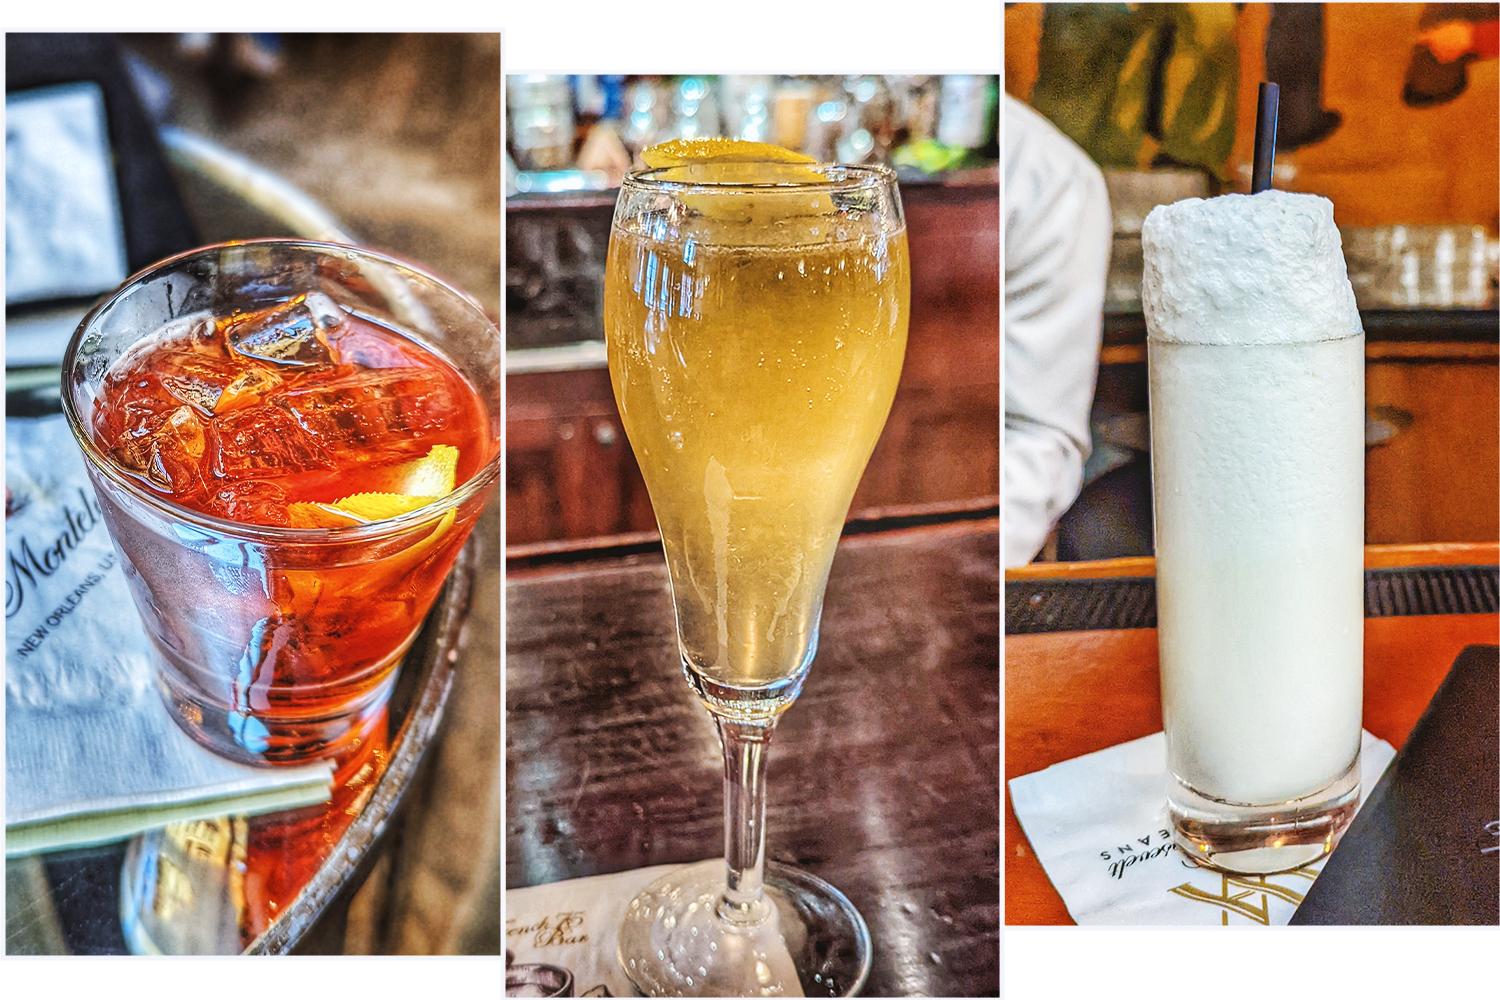 A Vieux Carré at the Carousel Bar, French 75 at Arnaud’s and Ramos Gin Fizz at the Sazerac Bar in New Orleans, Louisiana